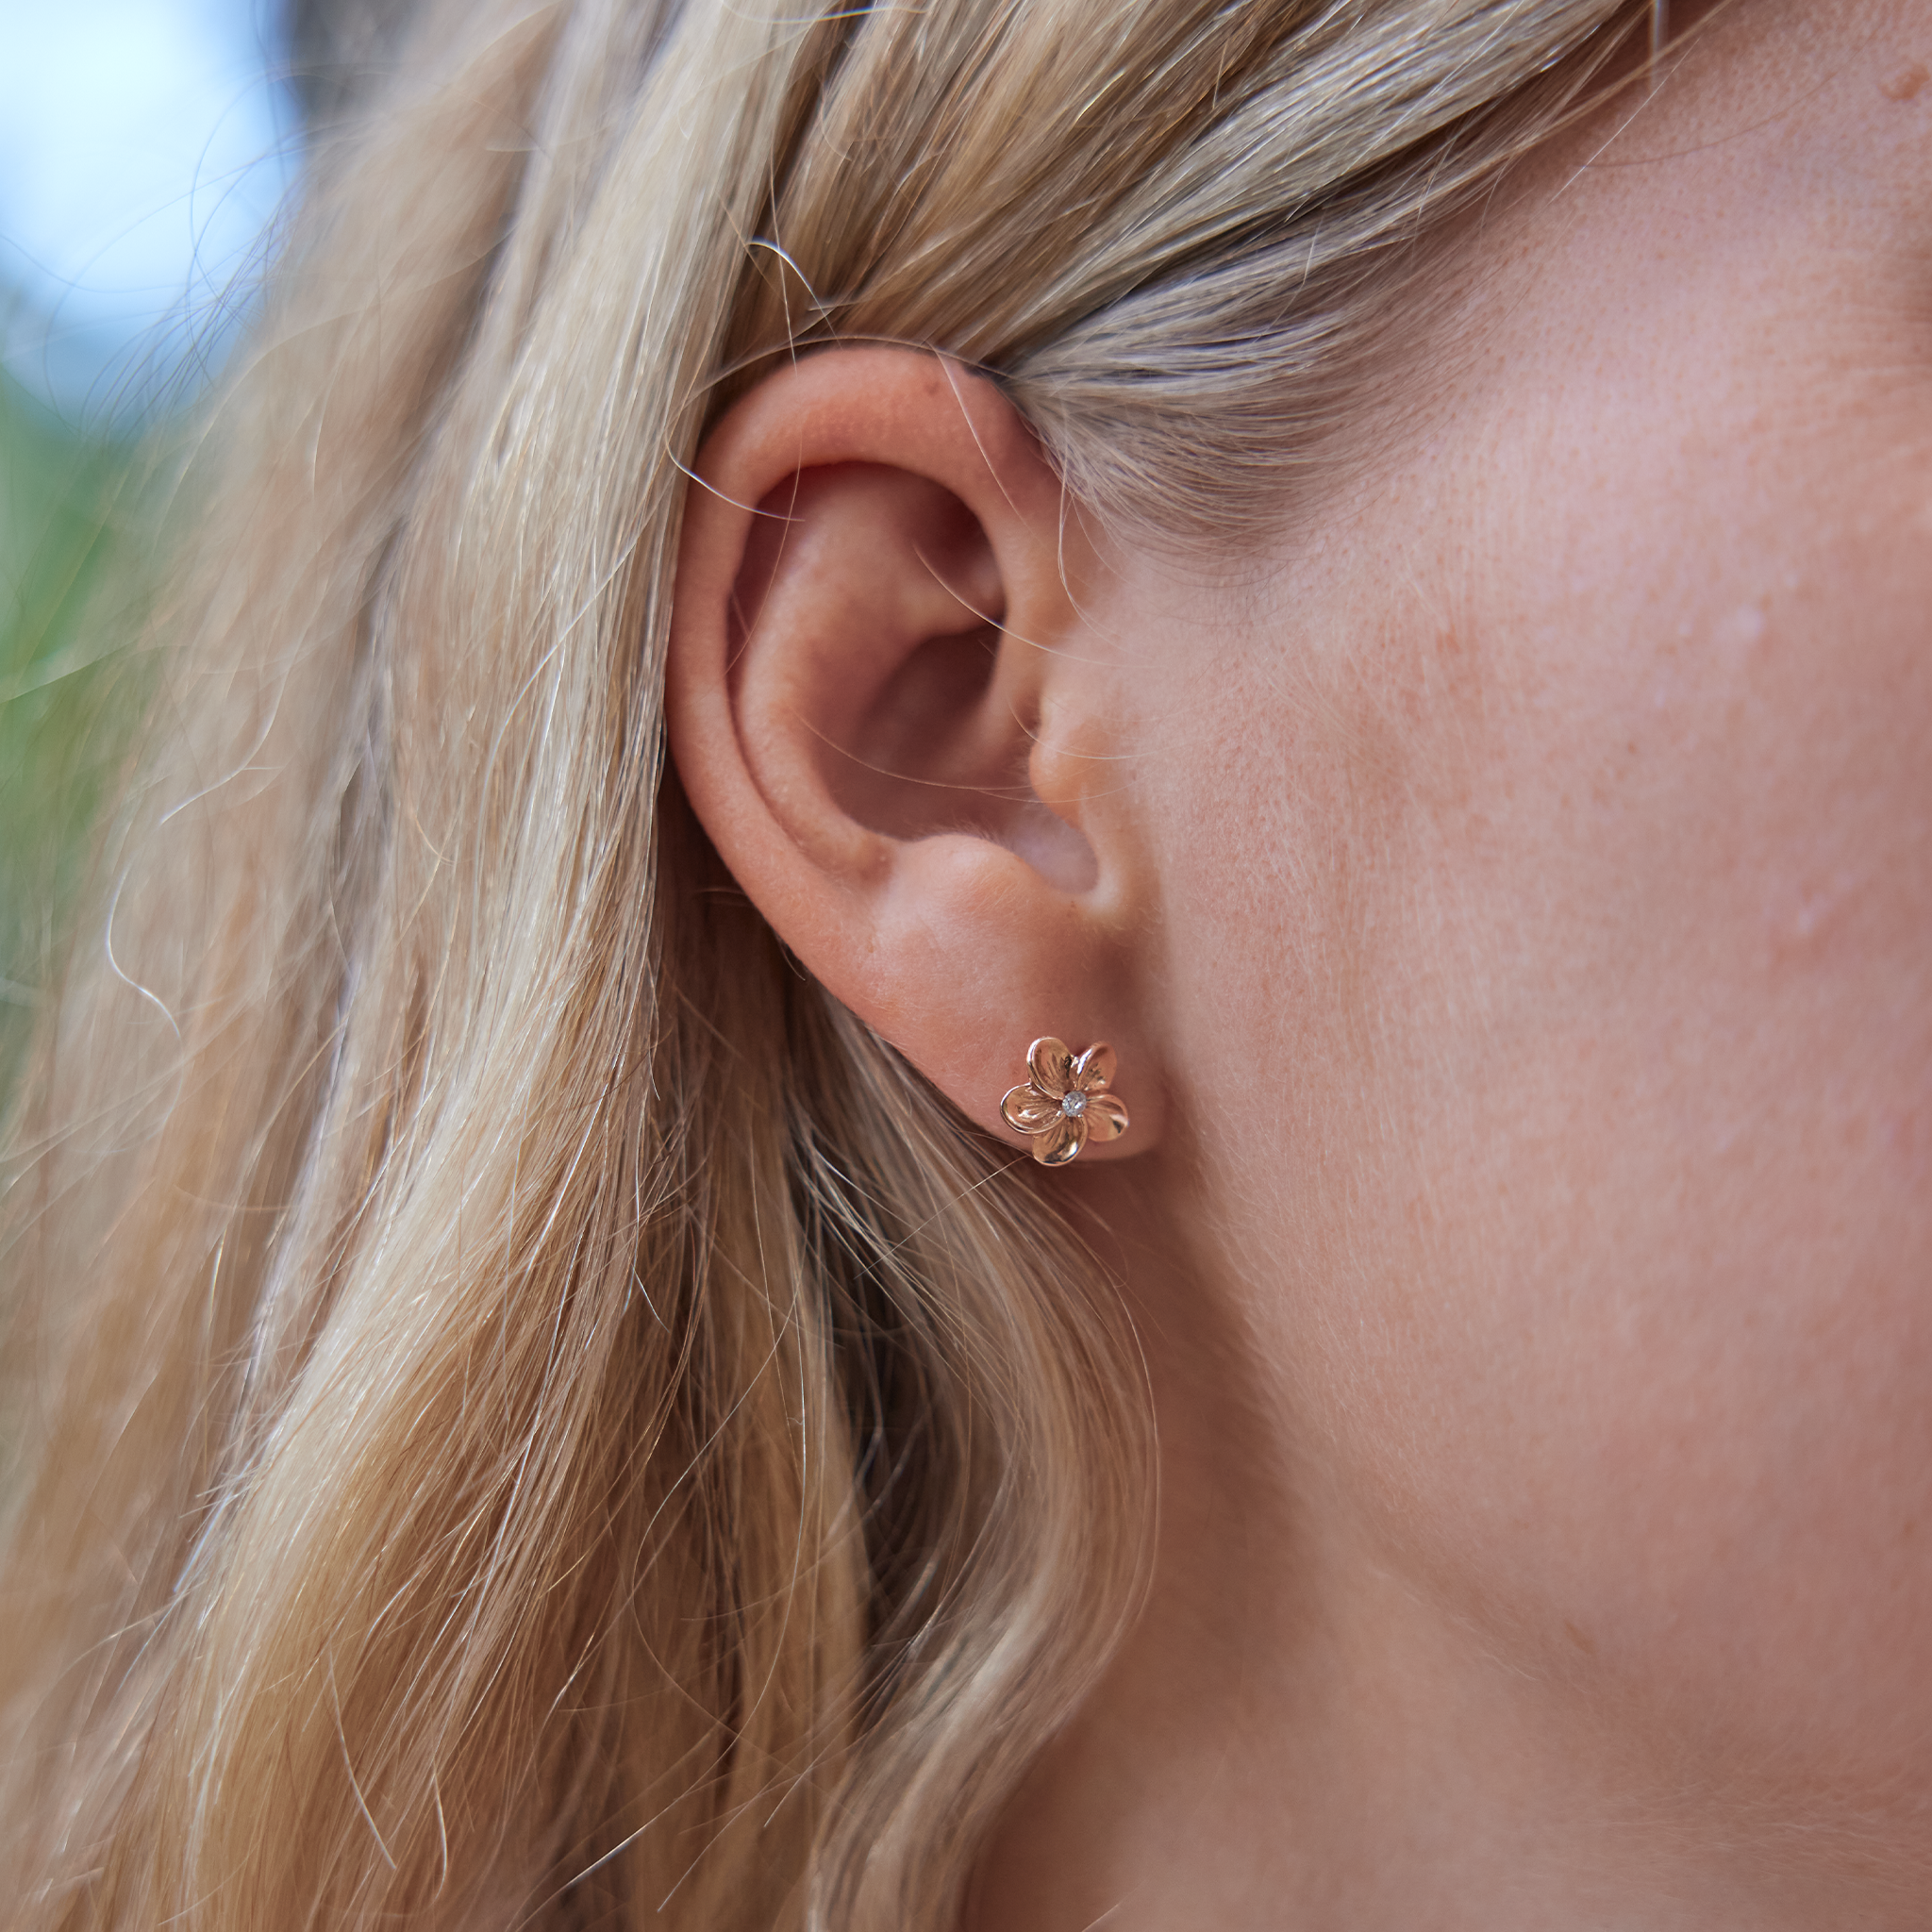 Womanʻs right ear with Hawaiian Heirloom Plumeria Earrings in Rose Gold with Diamonds